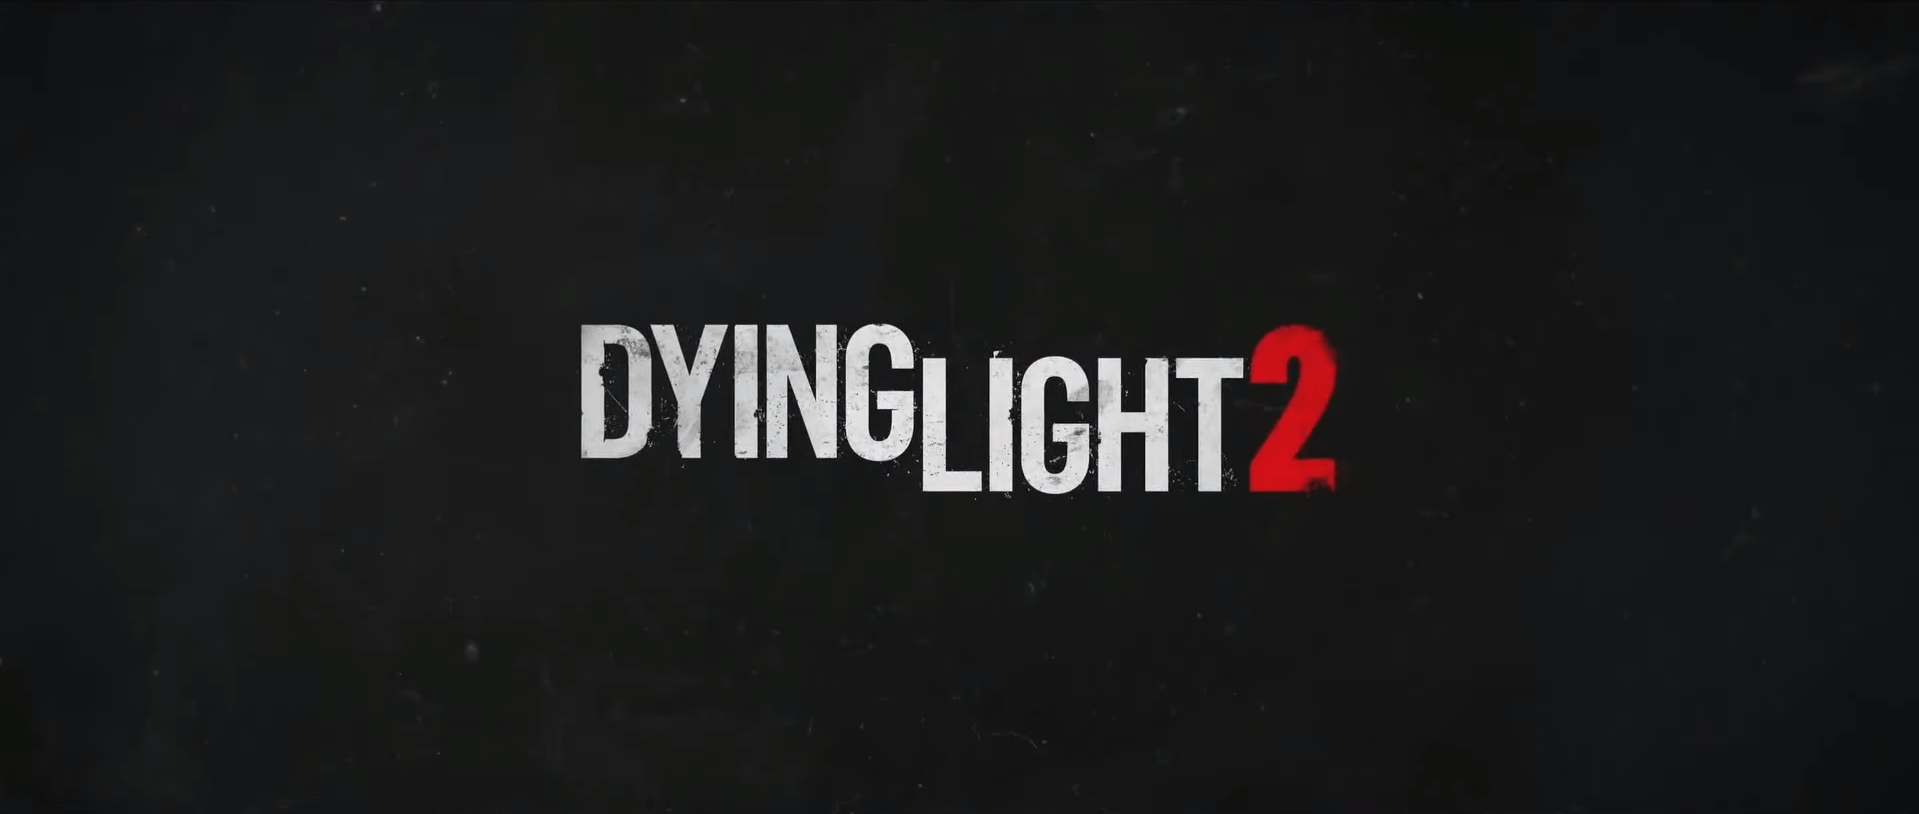 Dying Light 2 Announces Date of Gameplay Demo Livestream